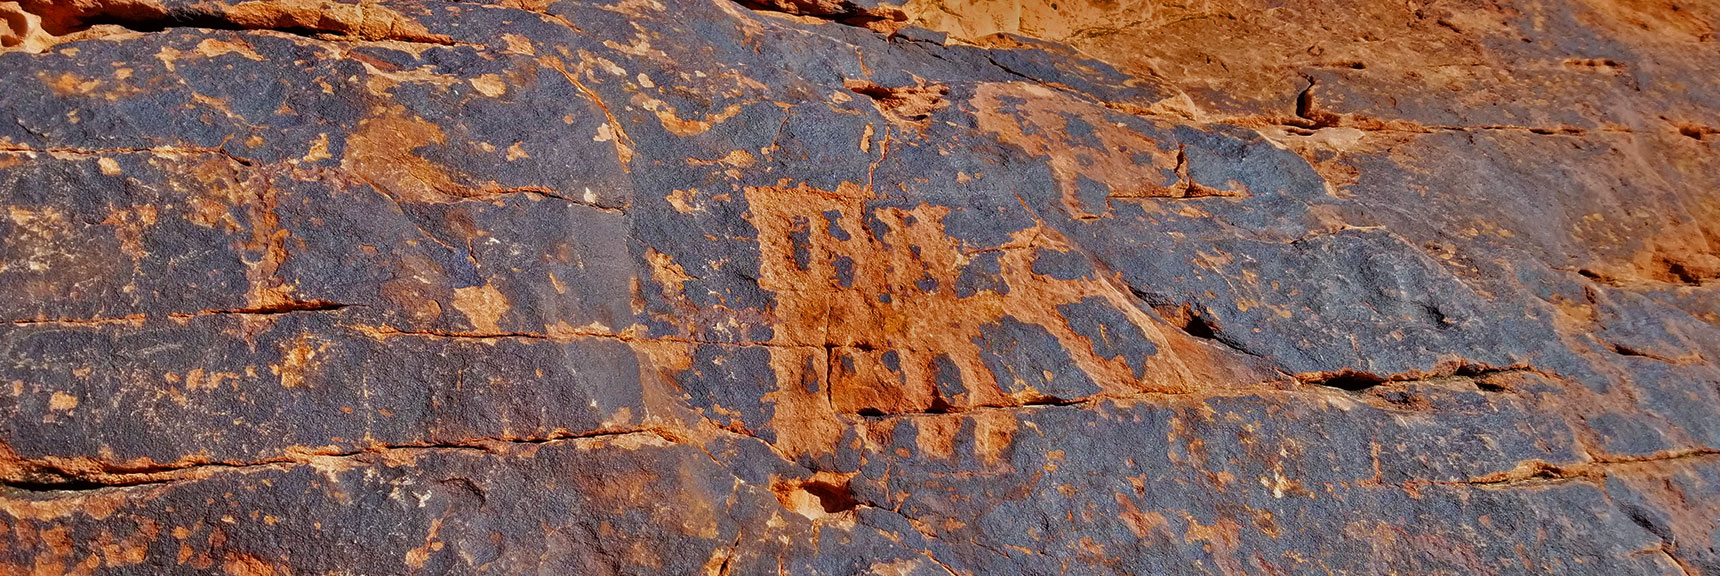 Petroglyphs on Mouse's Tank Trail in Valley of Fire State Park, Nevada, Slide 10